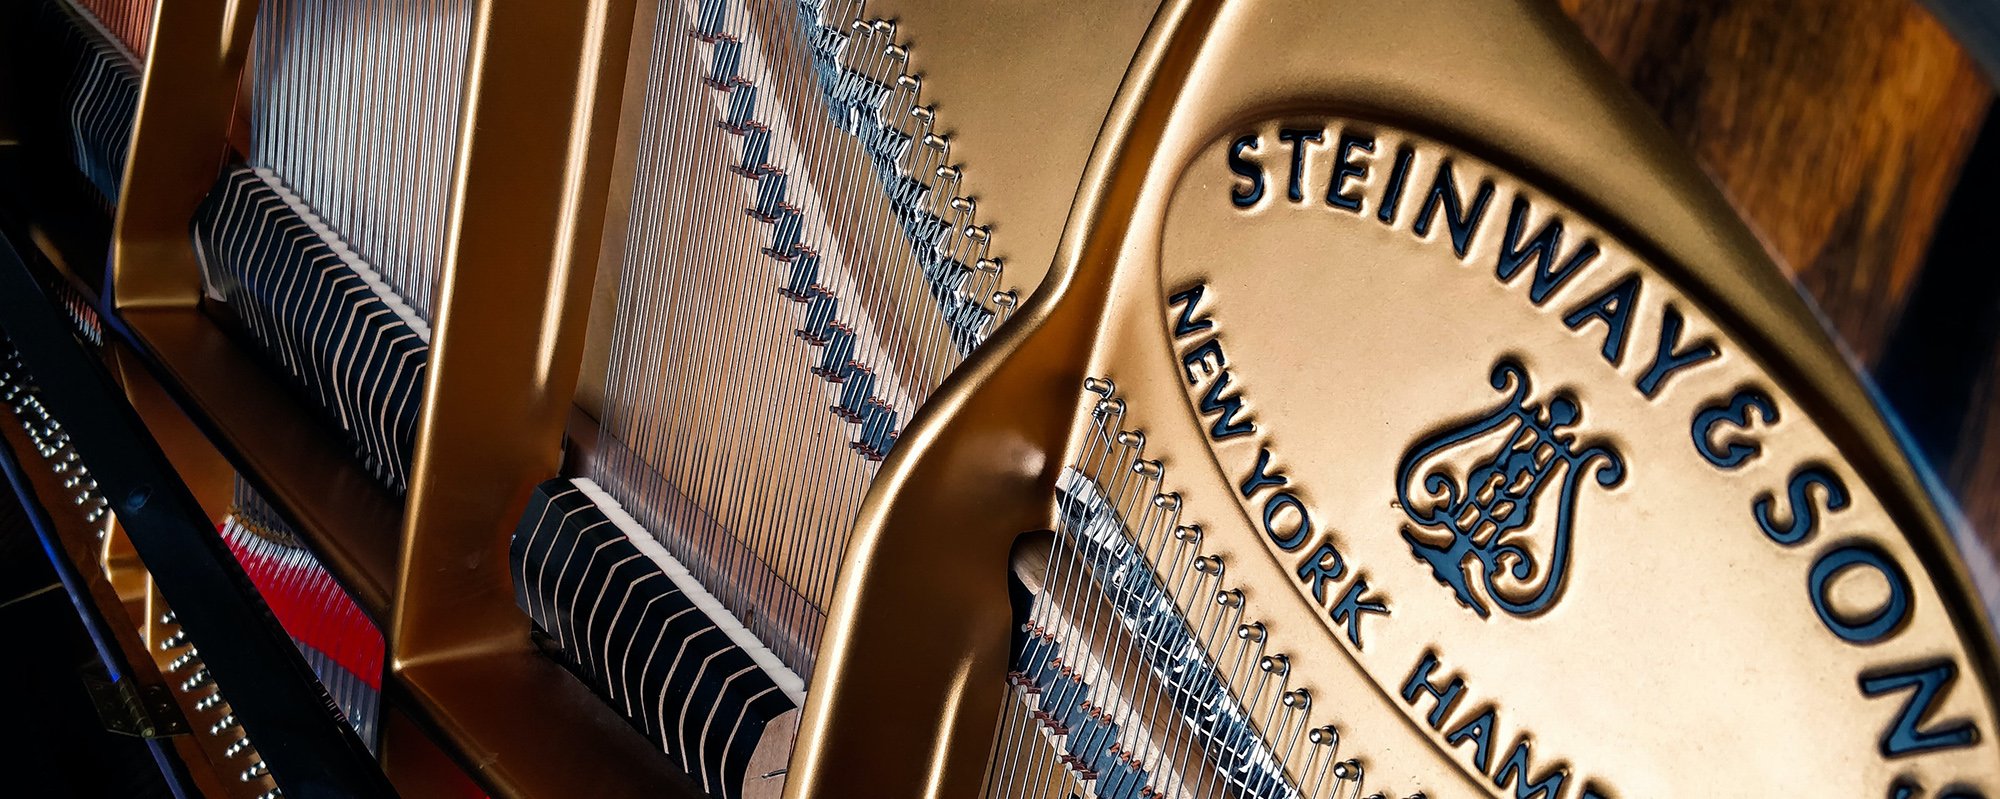 Close-up of the inside of a grand piano's strings - Steinway and Sons label.